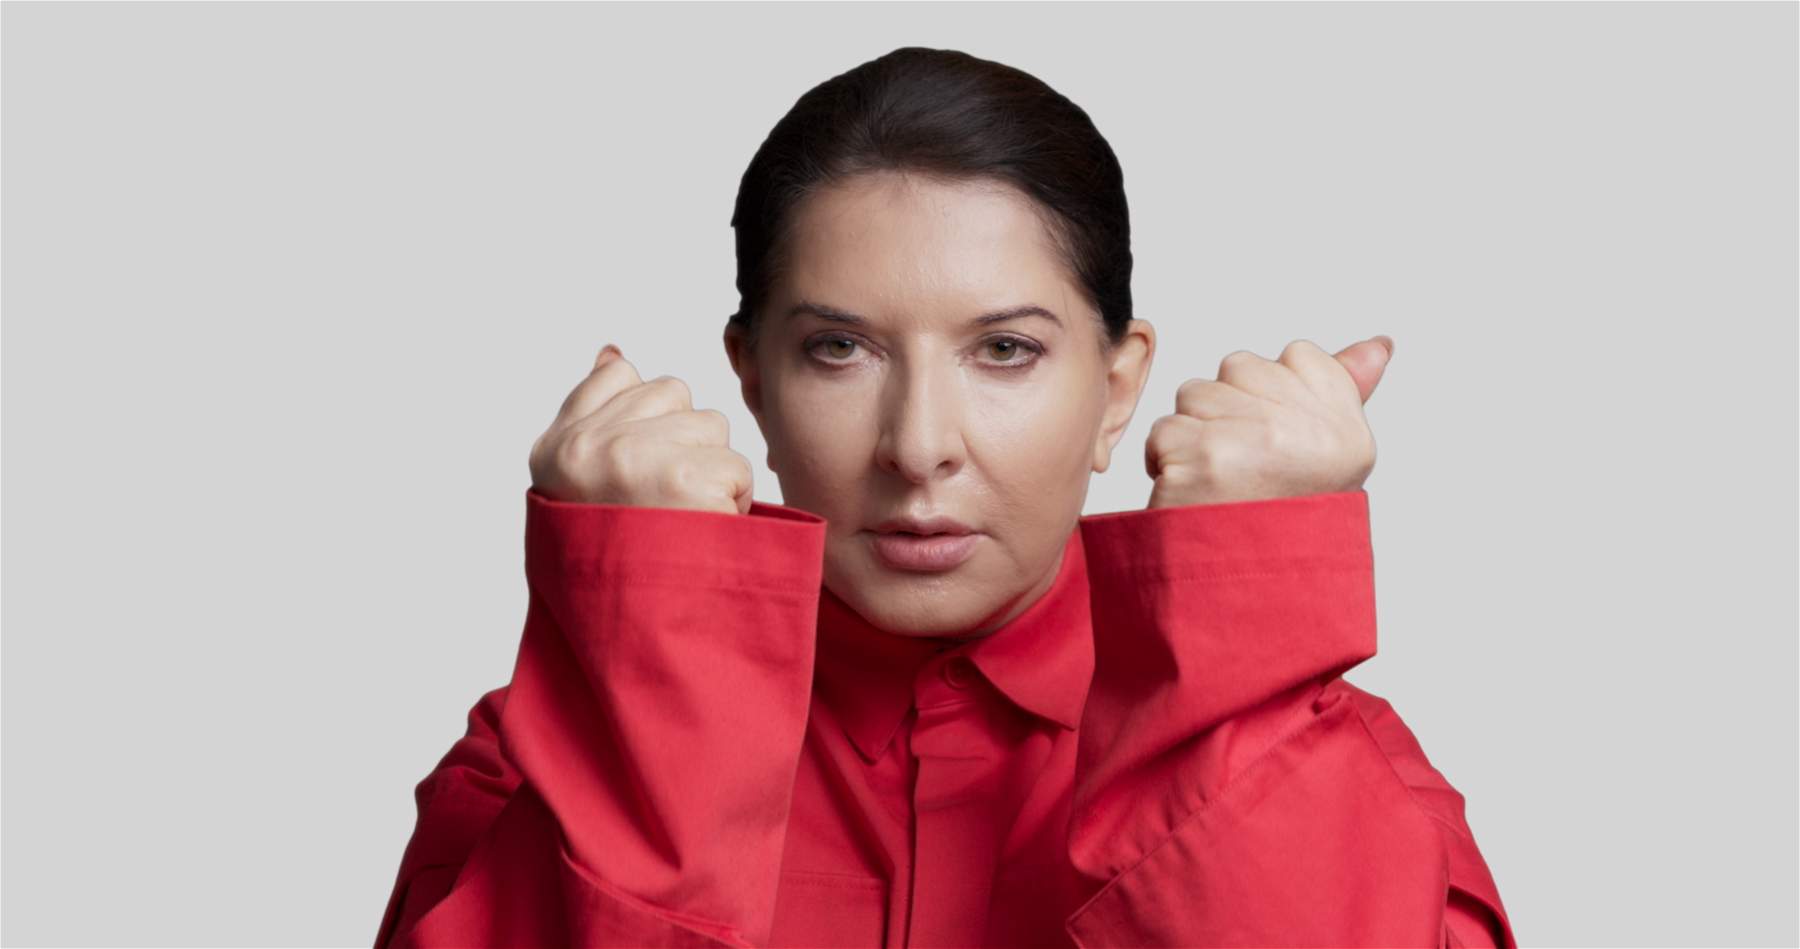 Marina Abramović becomes Honorary Academician of Carrara. She will give online lectio on June 23